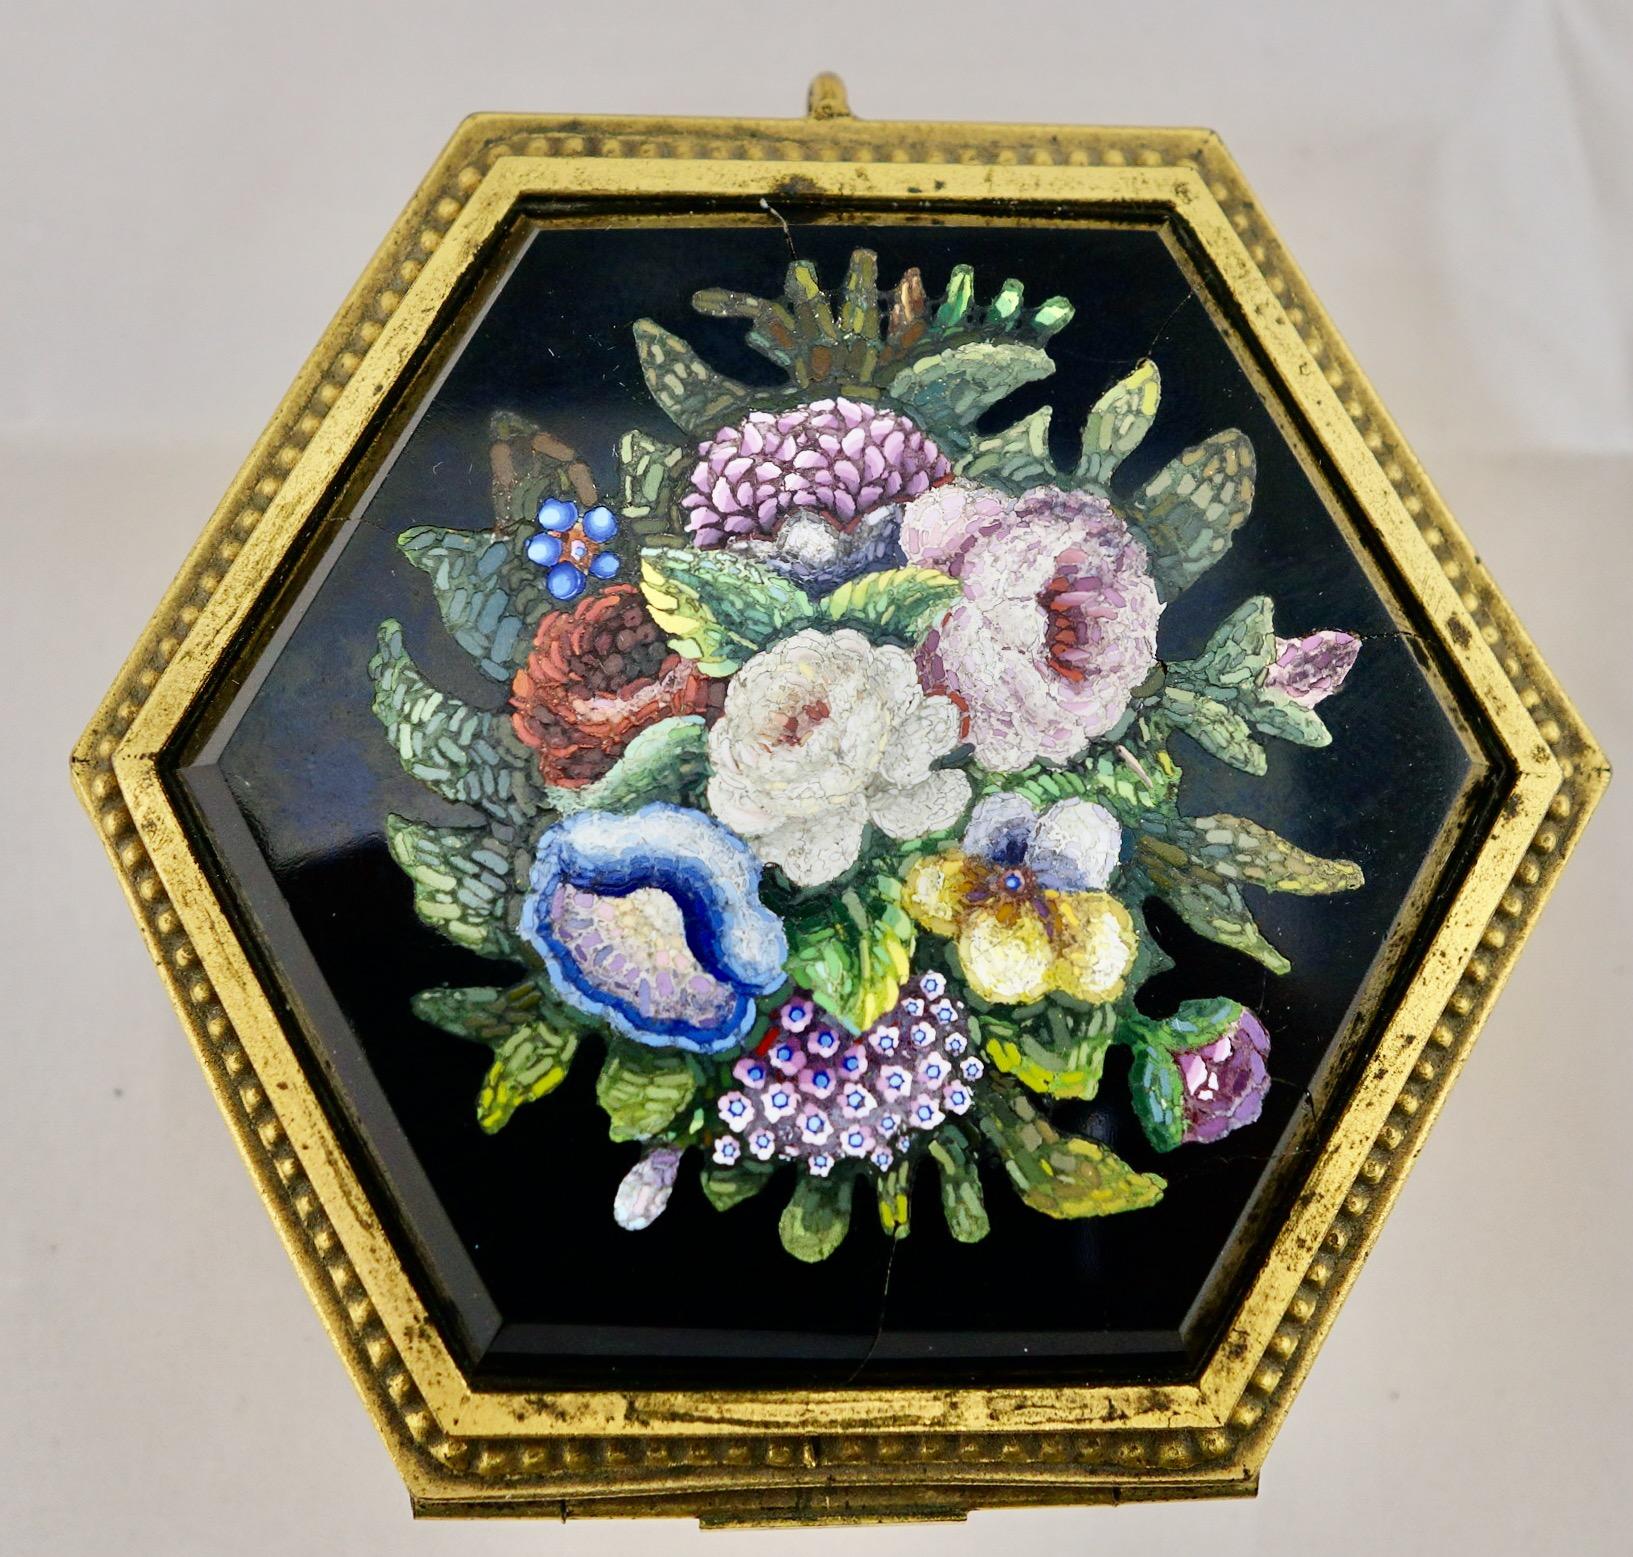 Italian micromosaic hexagonal box by Roccheggiani workship, Rome, Italy, 1880s. Most likely executed after Cesare Roccheggiani left Vatican workshop in 1864, and opened his own afterwards. The box is signed on the interior lining. It is 3 1/2